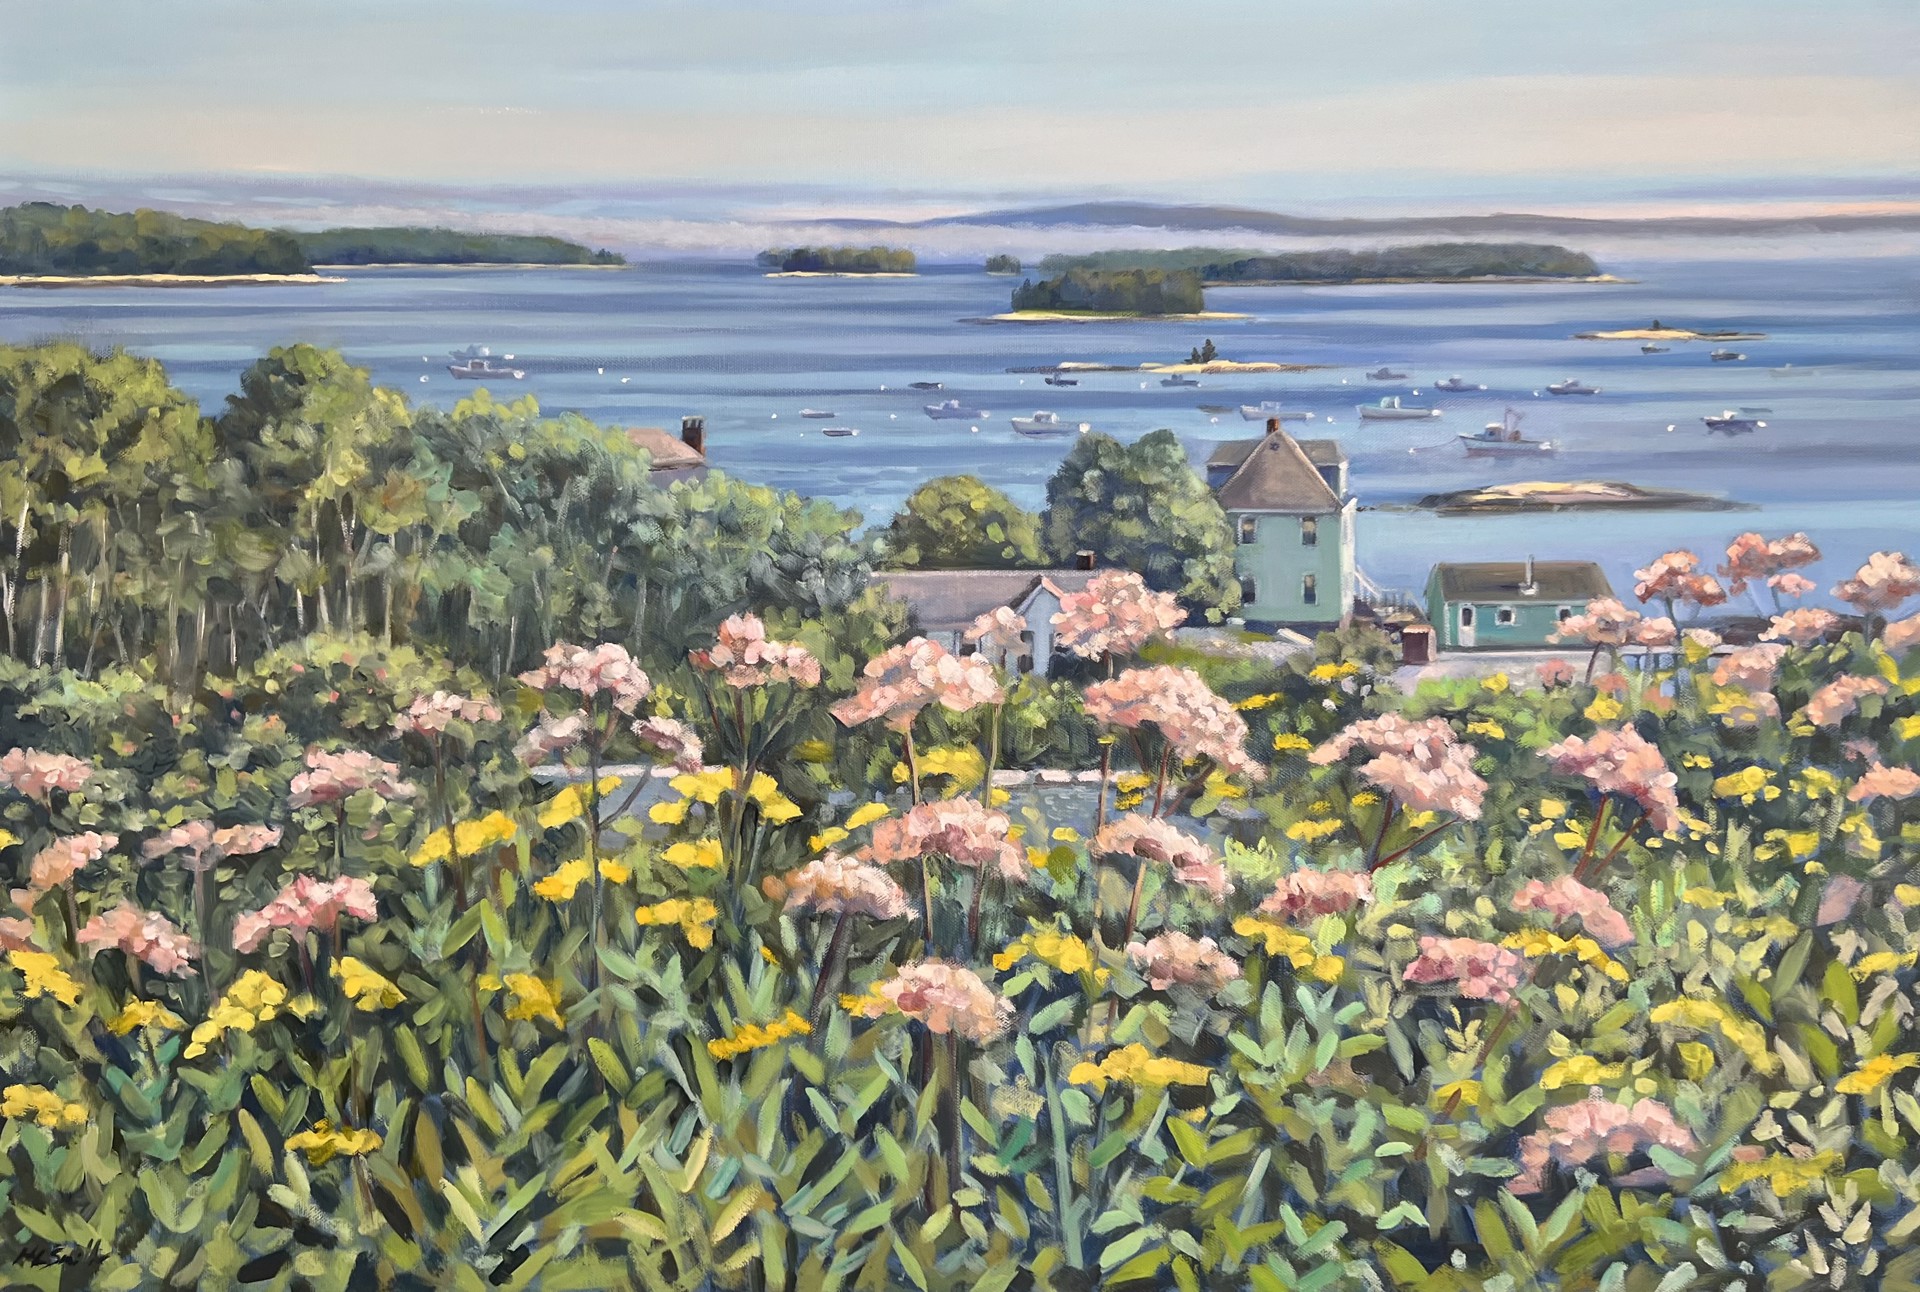 The Peak of Summertime in Stonington by Holly L. Smith